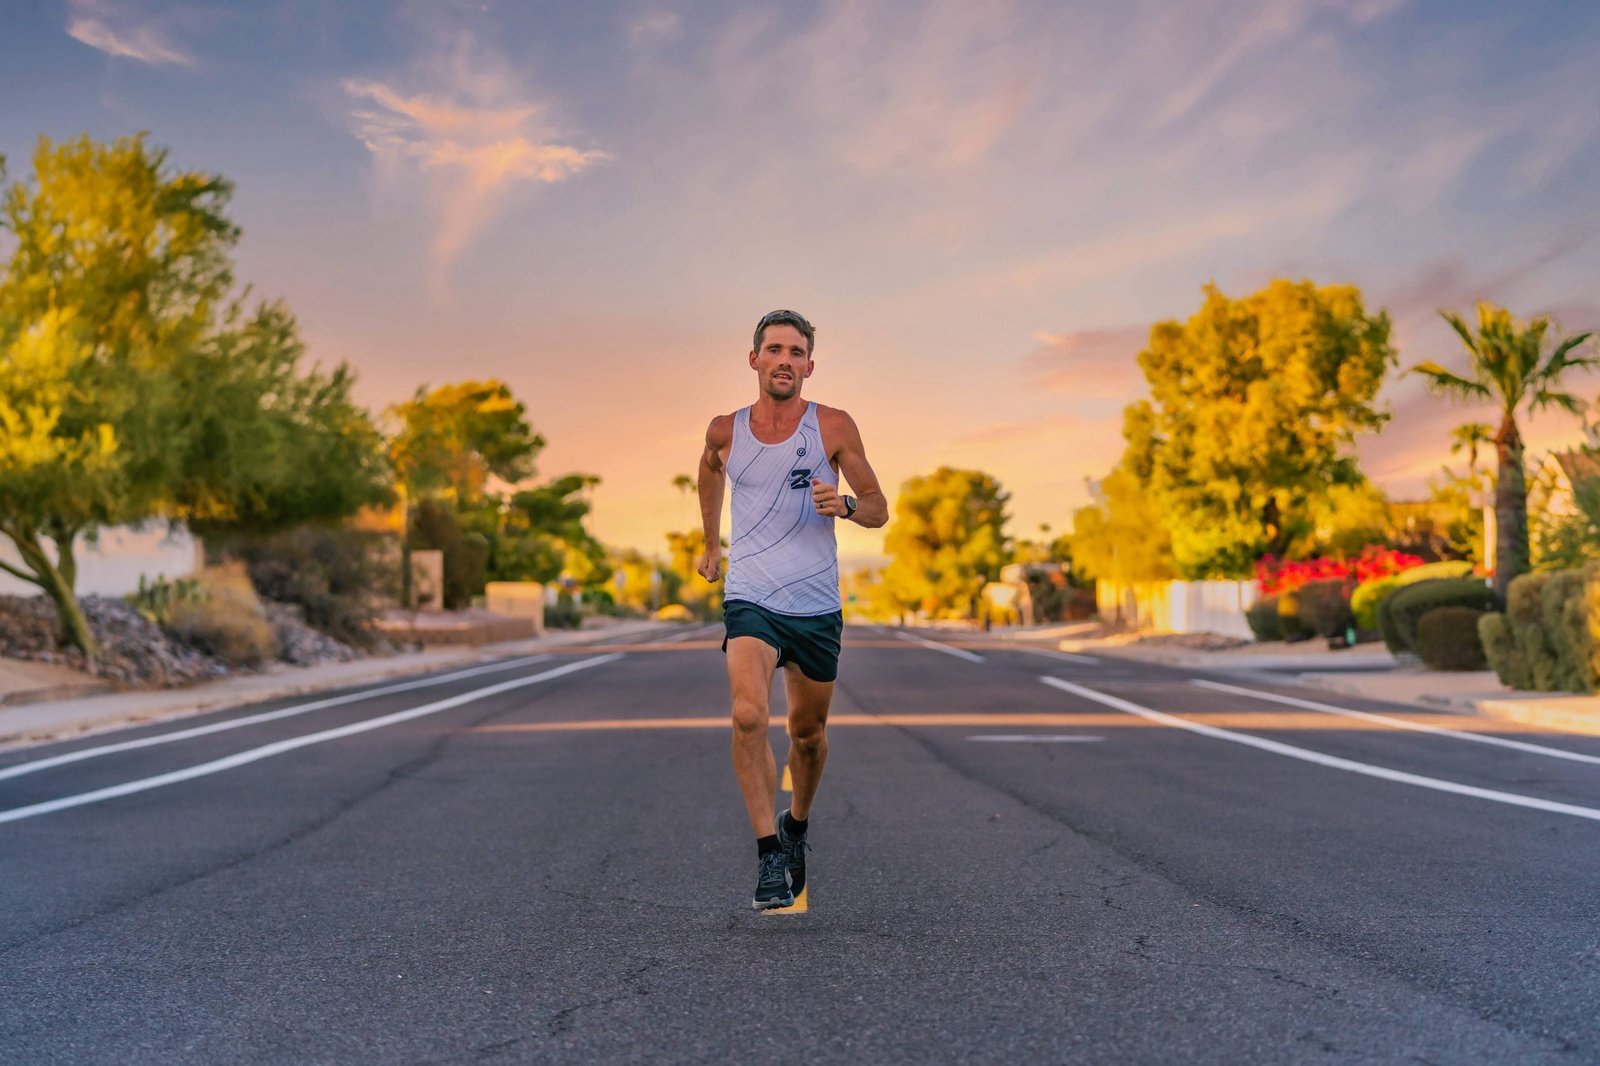 5 tips on how to improve your endurance by Zach Bitter